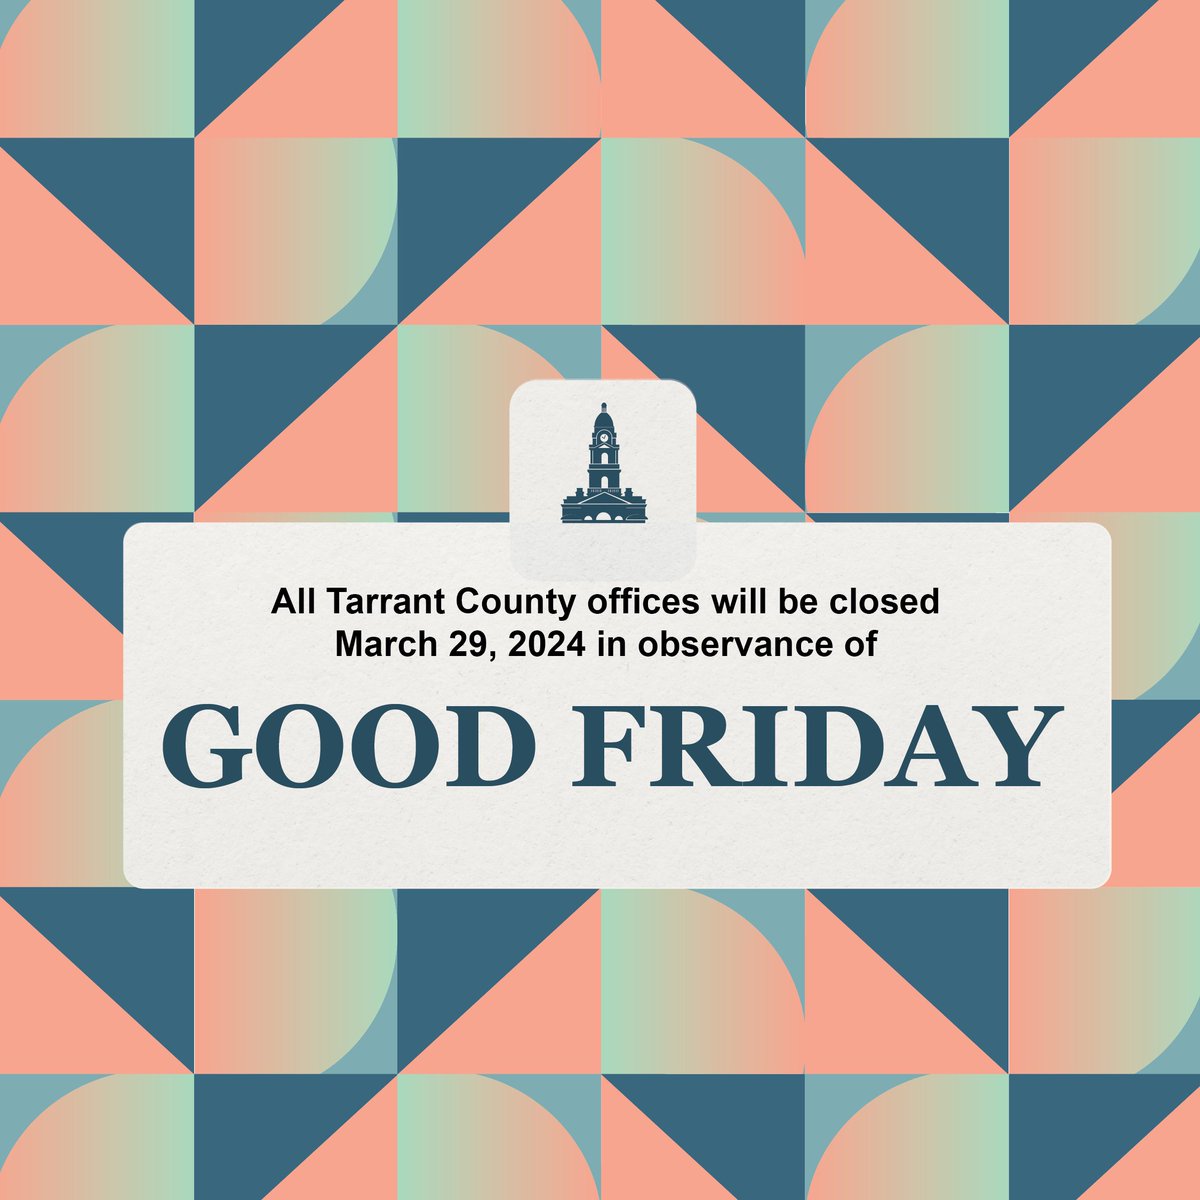 All Tarrant County offices will be closed March 29, 2024, in observance of Good Friday.